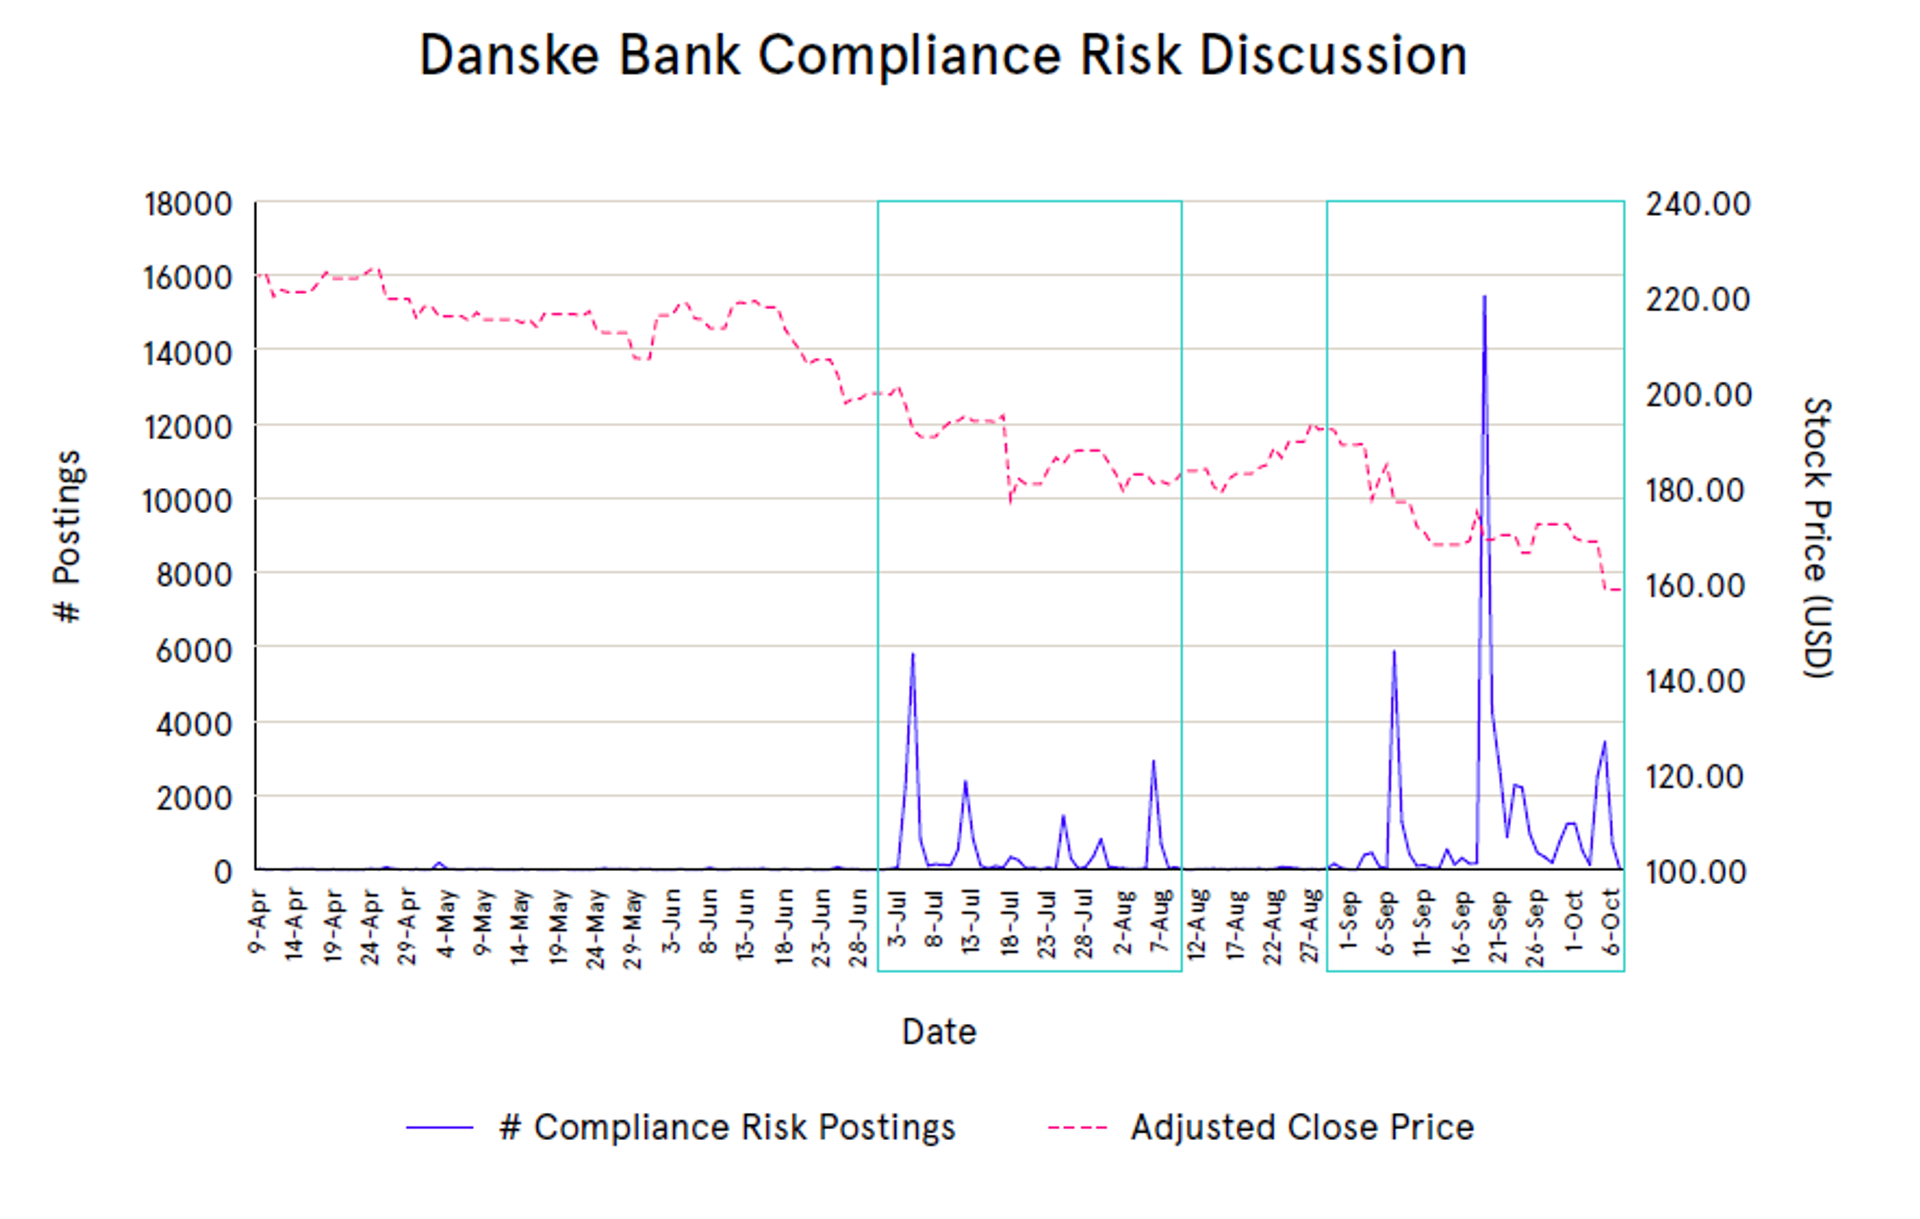 A chart showing the volume of discussion around Danske Bank's risk compliance